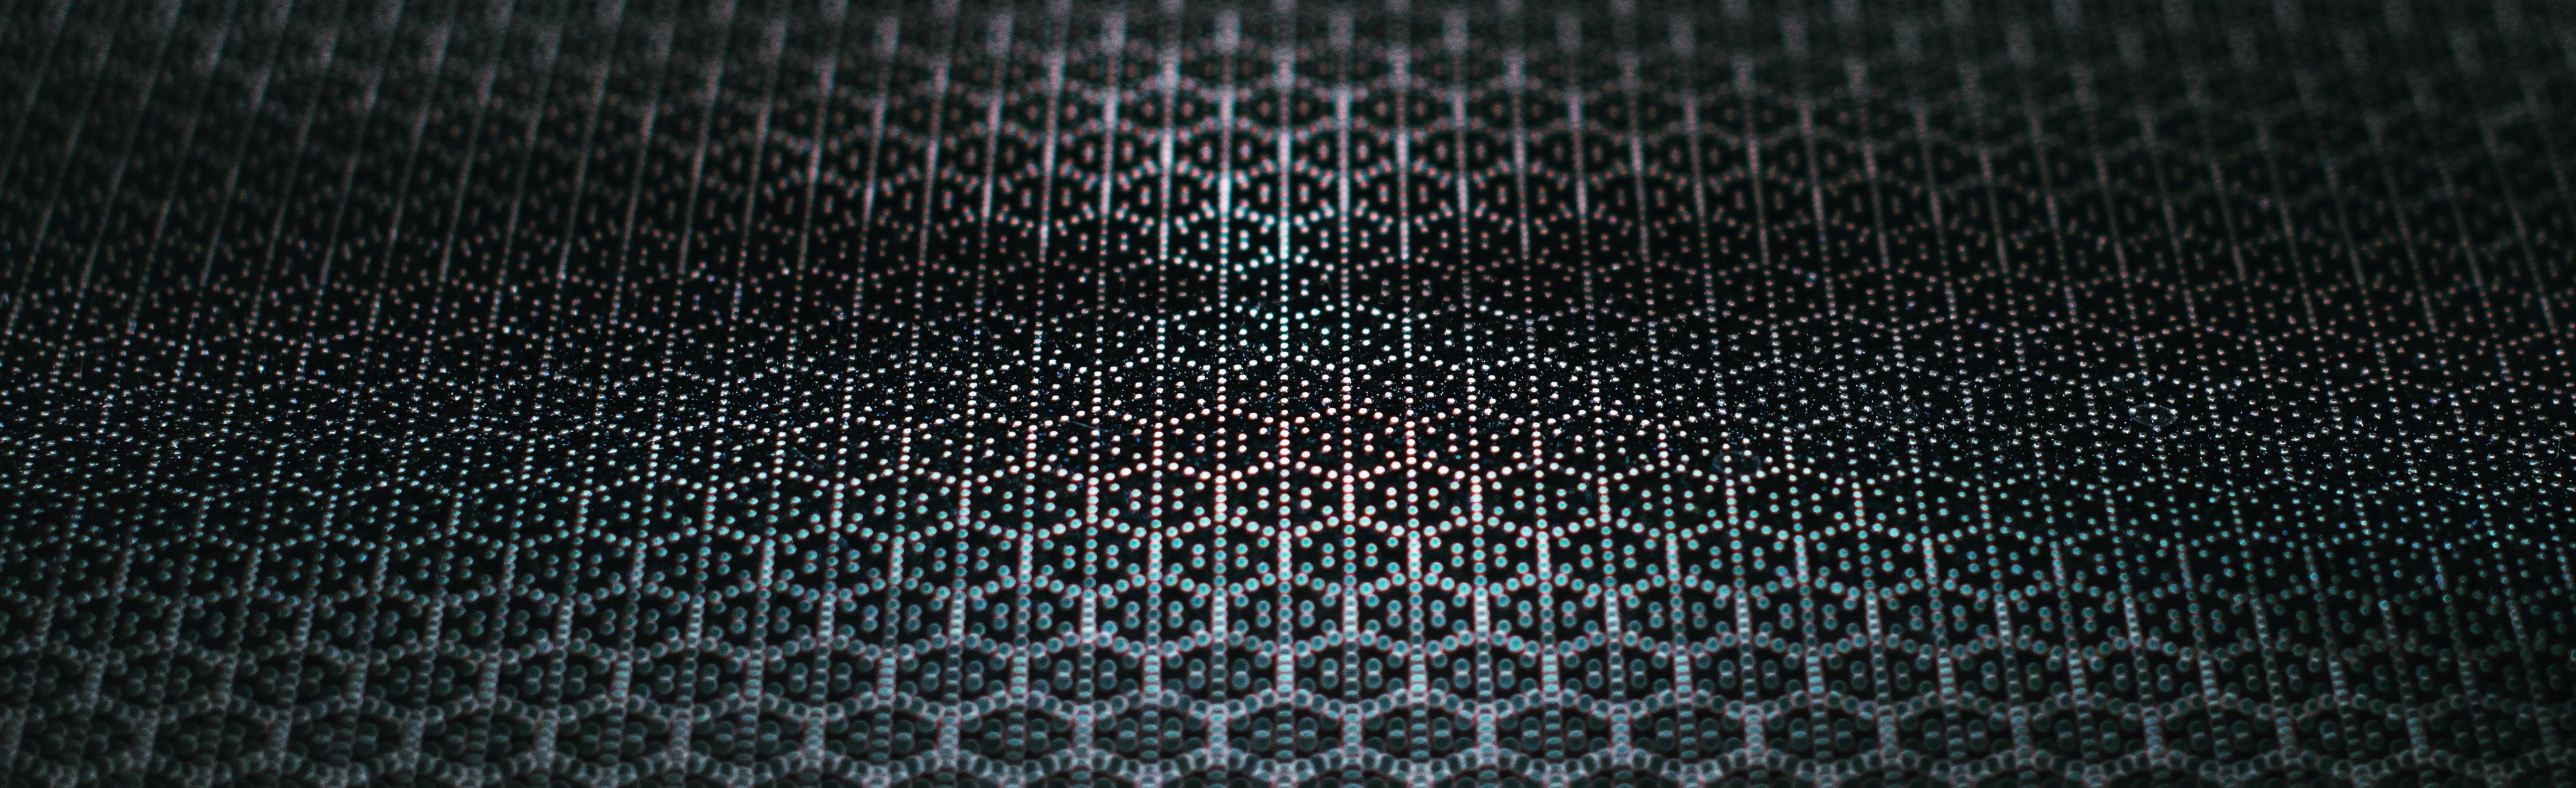 texture image of carbon materials